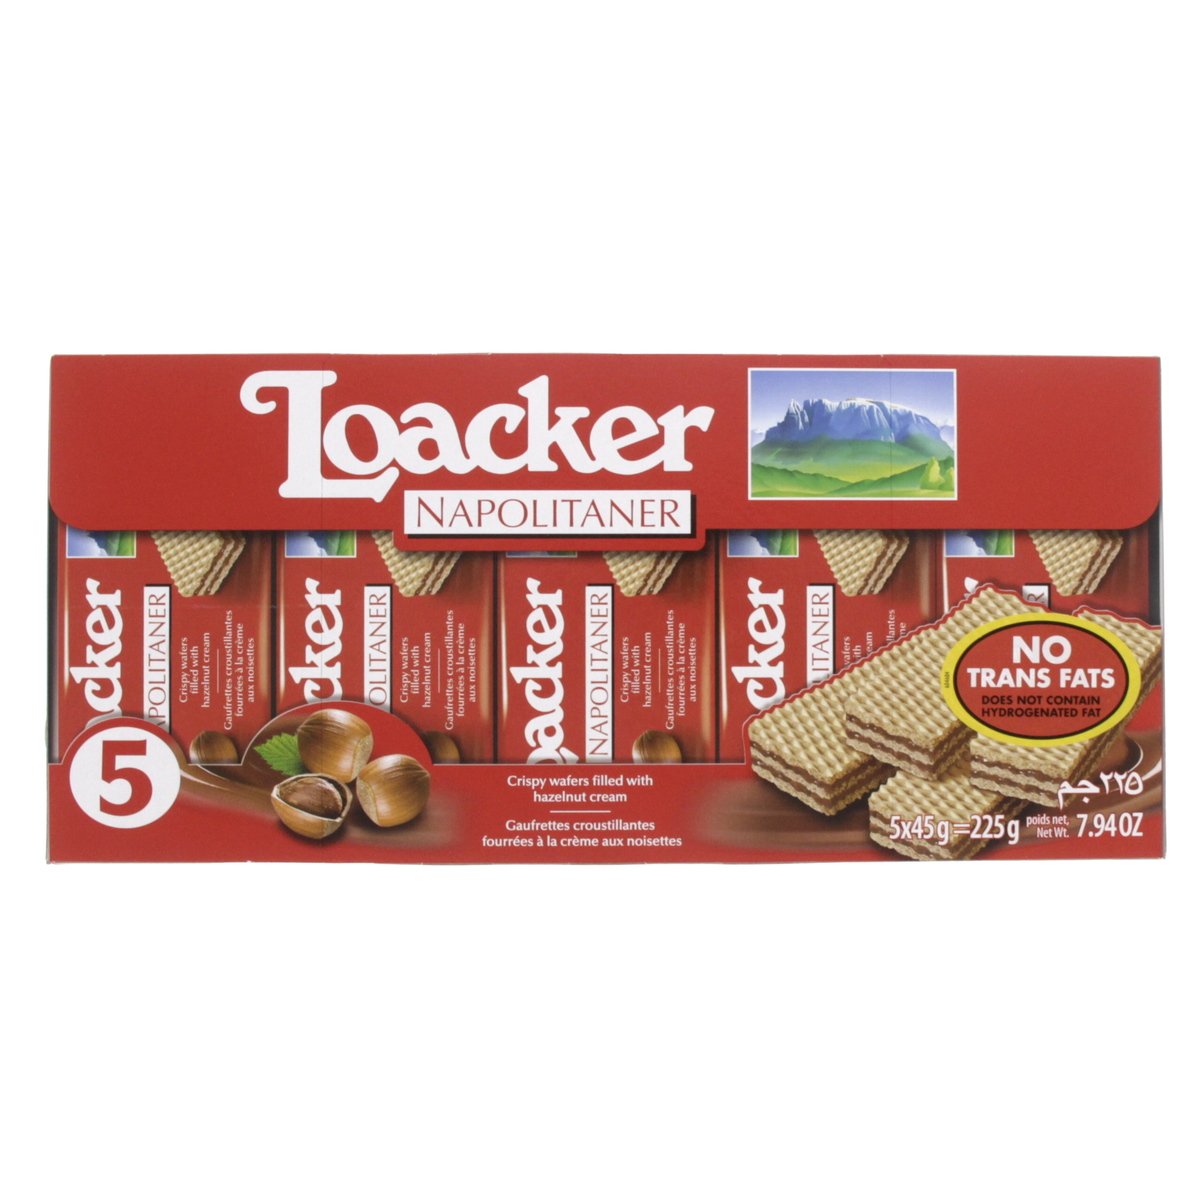 Loacker Napolitaner Wafers 5 x 45g